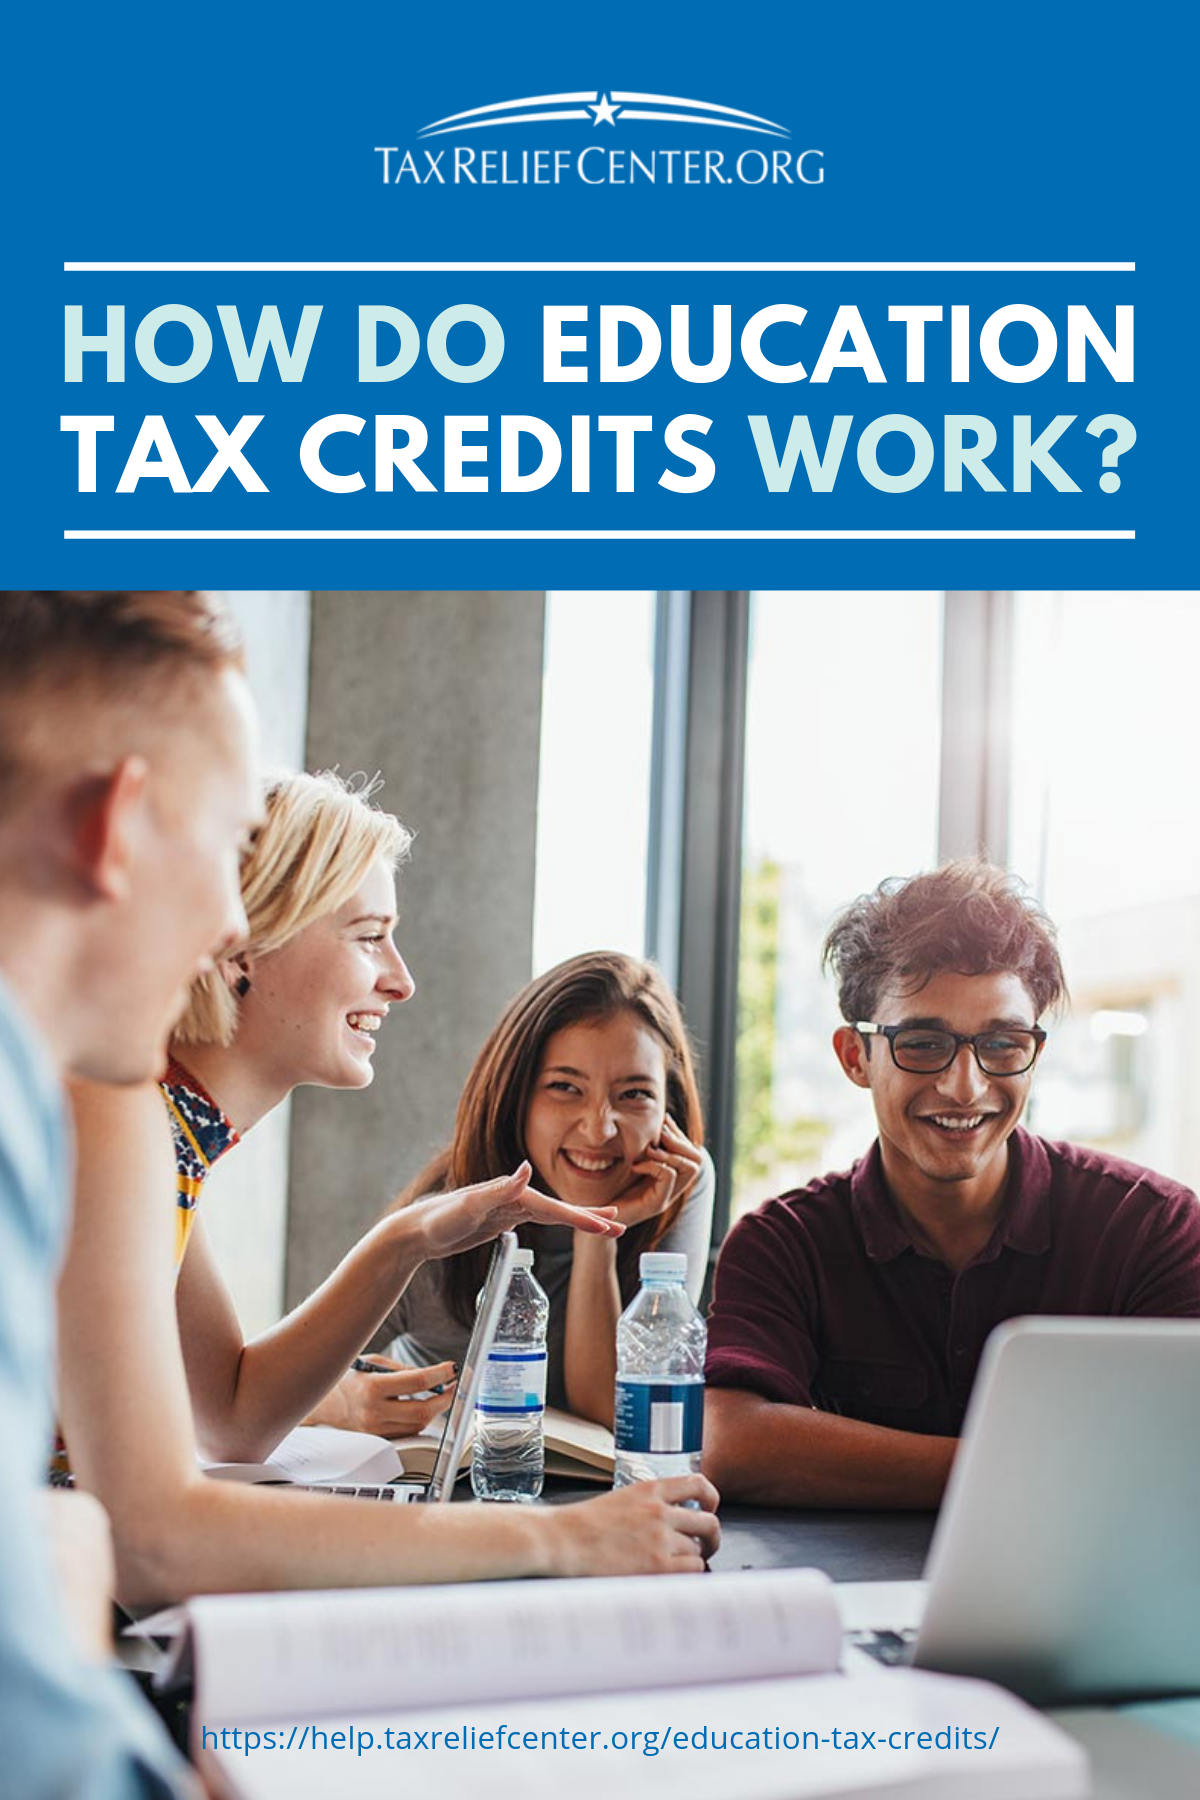 How Do Education Tax Credits Work? https://help.taxreliefcenter.org/education-tax-credits/